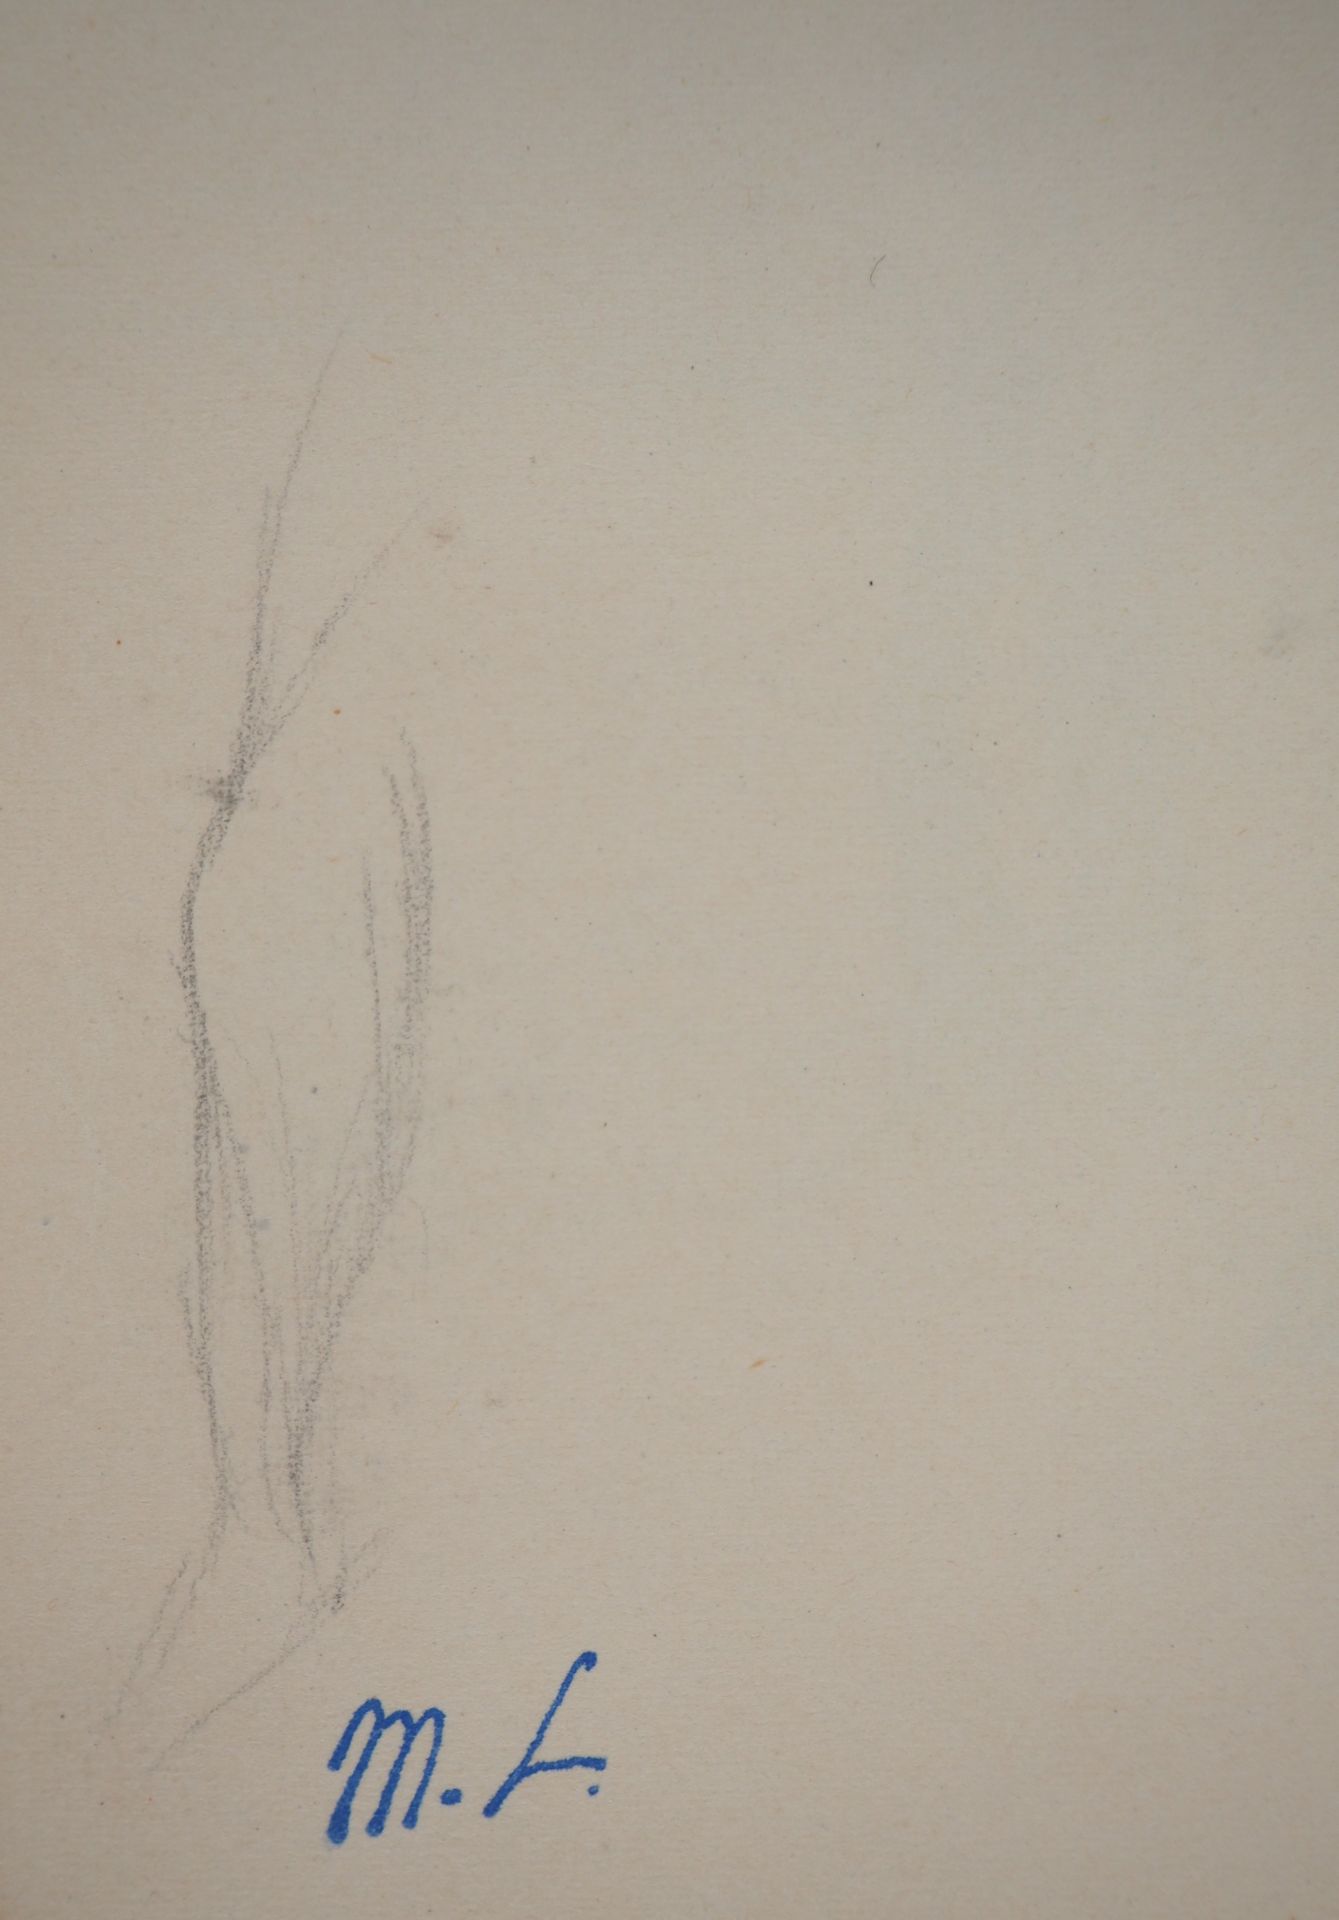 MARIE LAURENCIN Marie LAURENCIN

Sketch of a leg

Original drawing

Signed with &hellip;